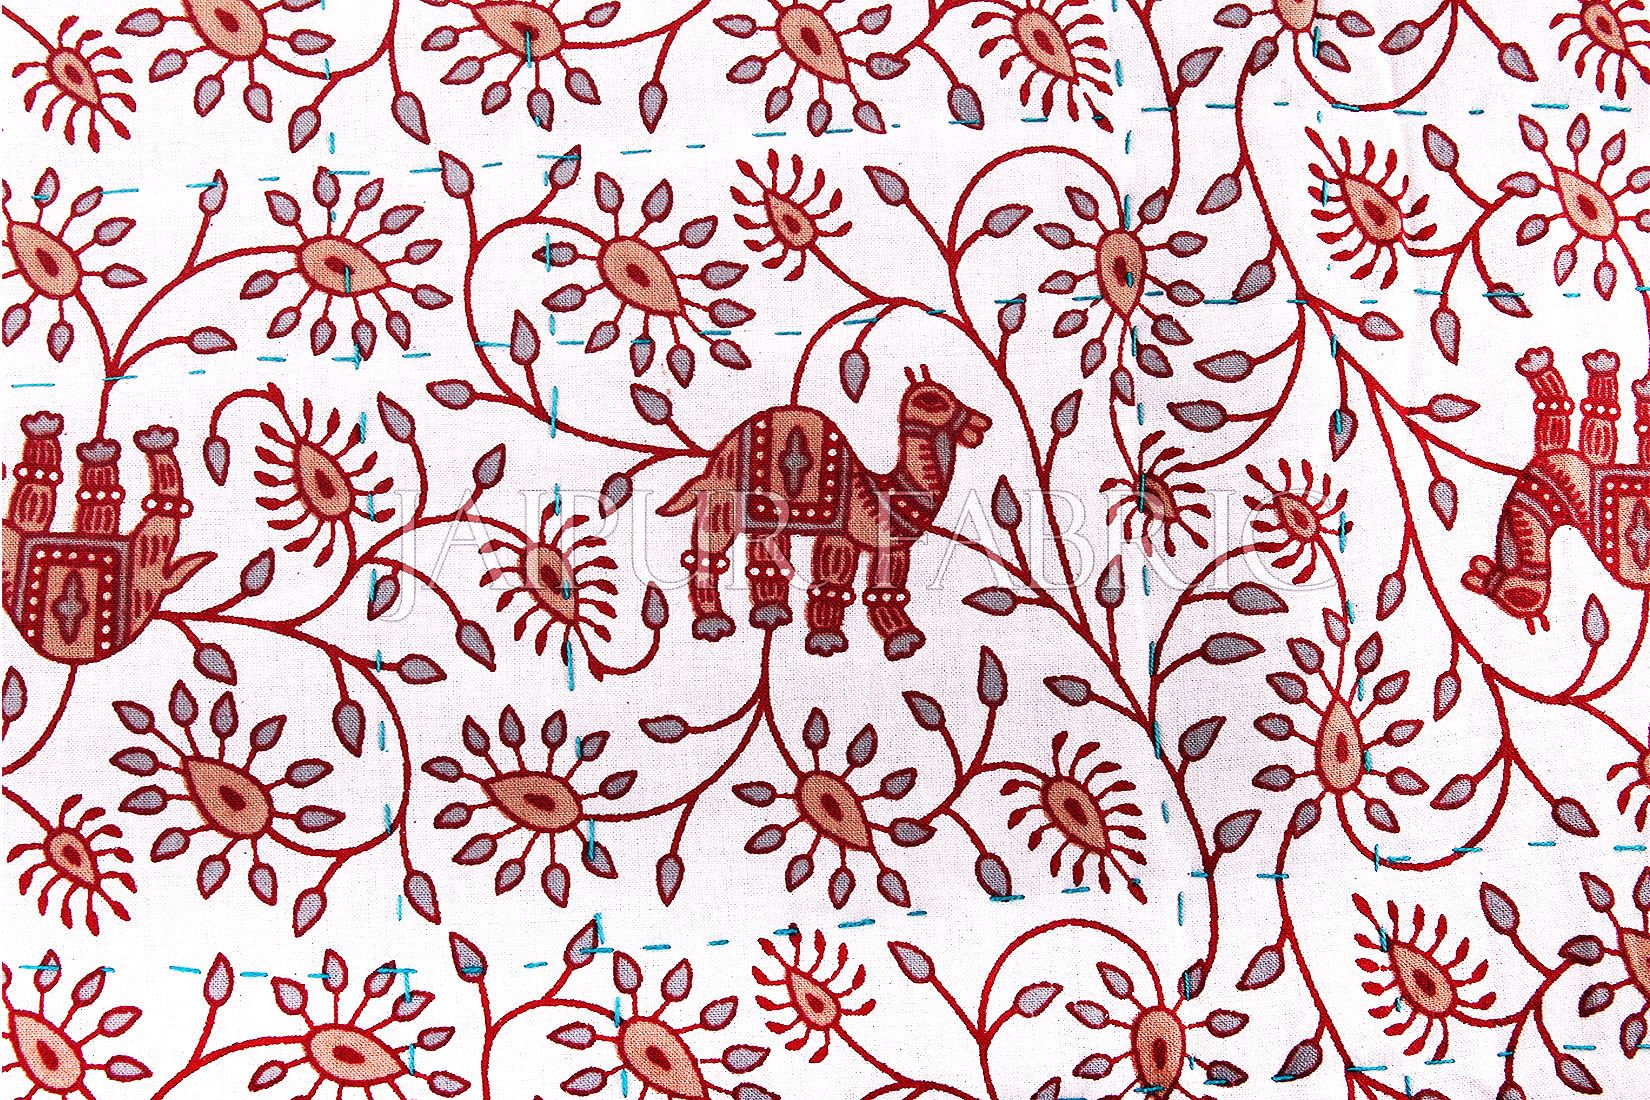 Brown Rajasthani Camel Border Flower Print Cotton AC Double Bed Quilt